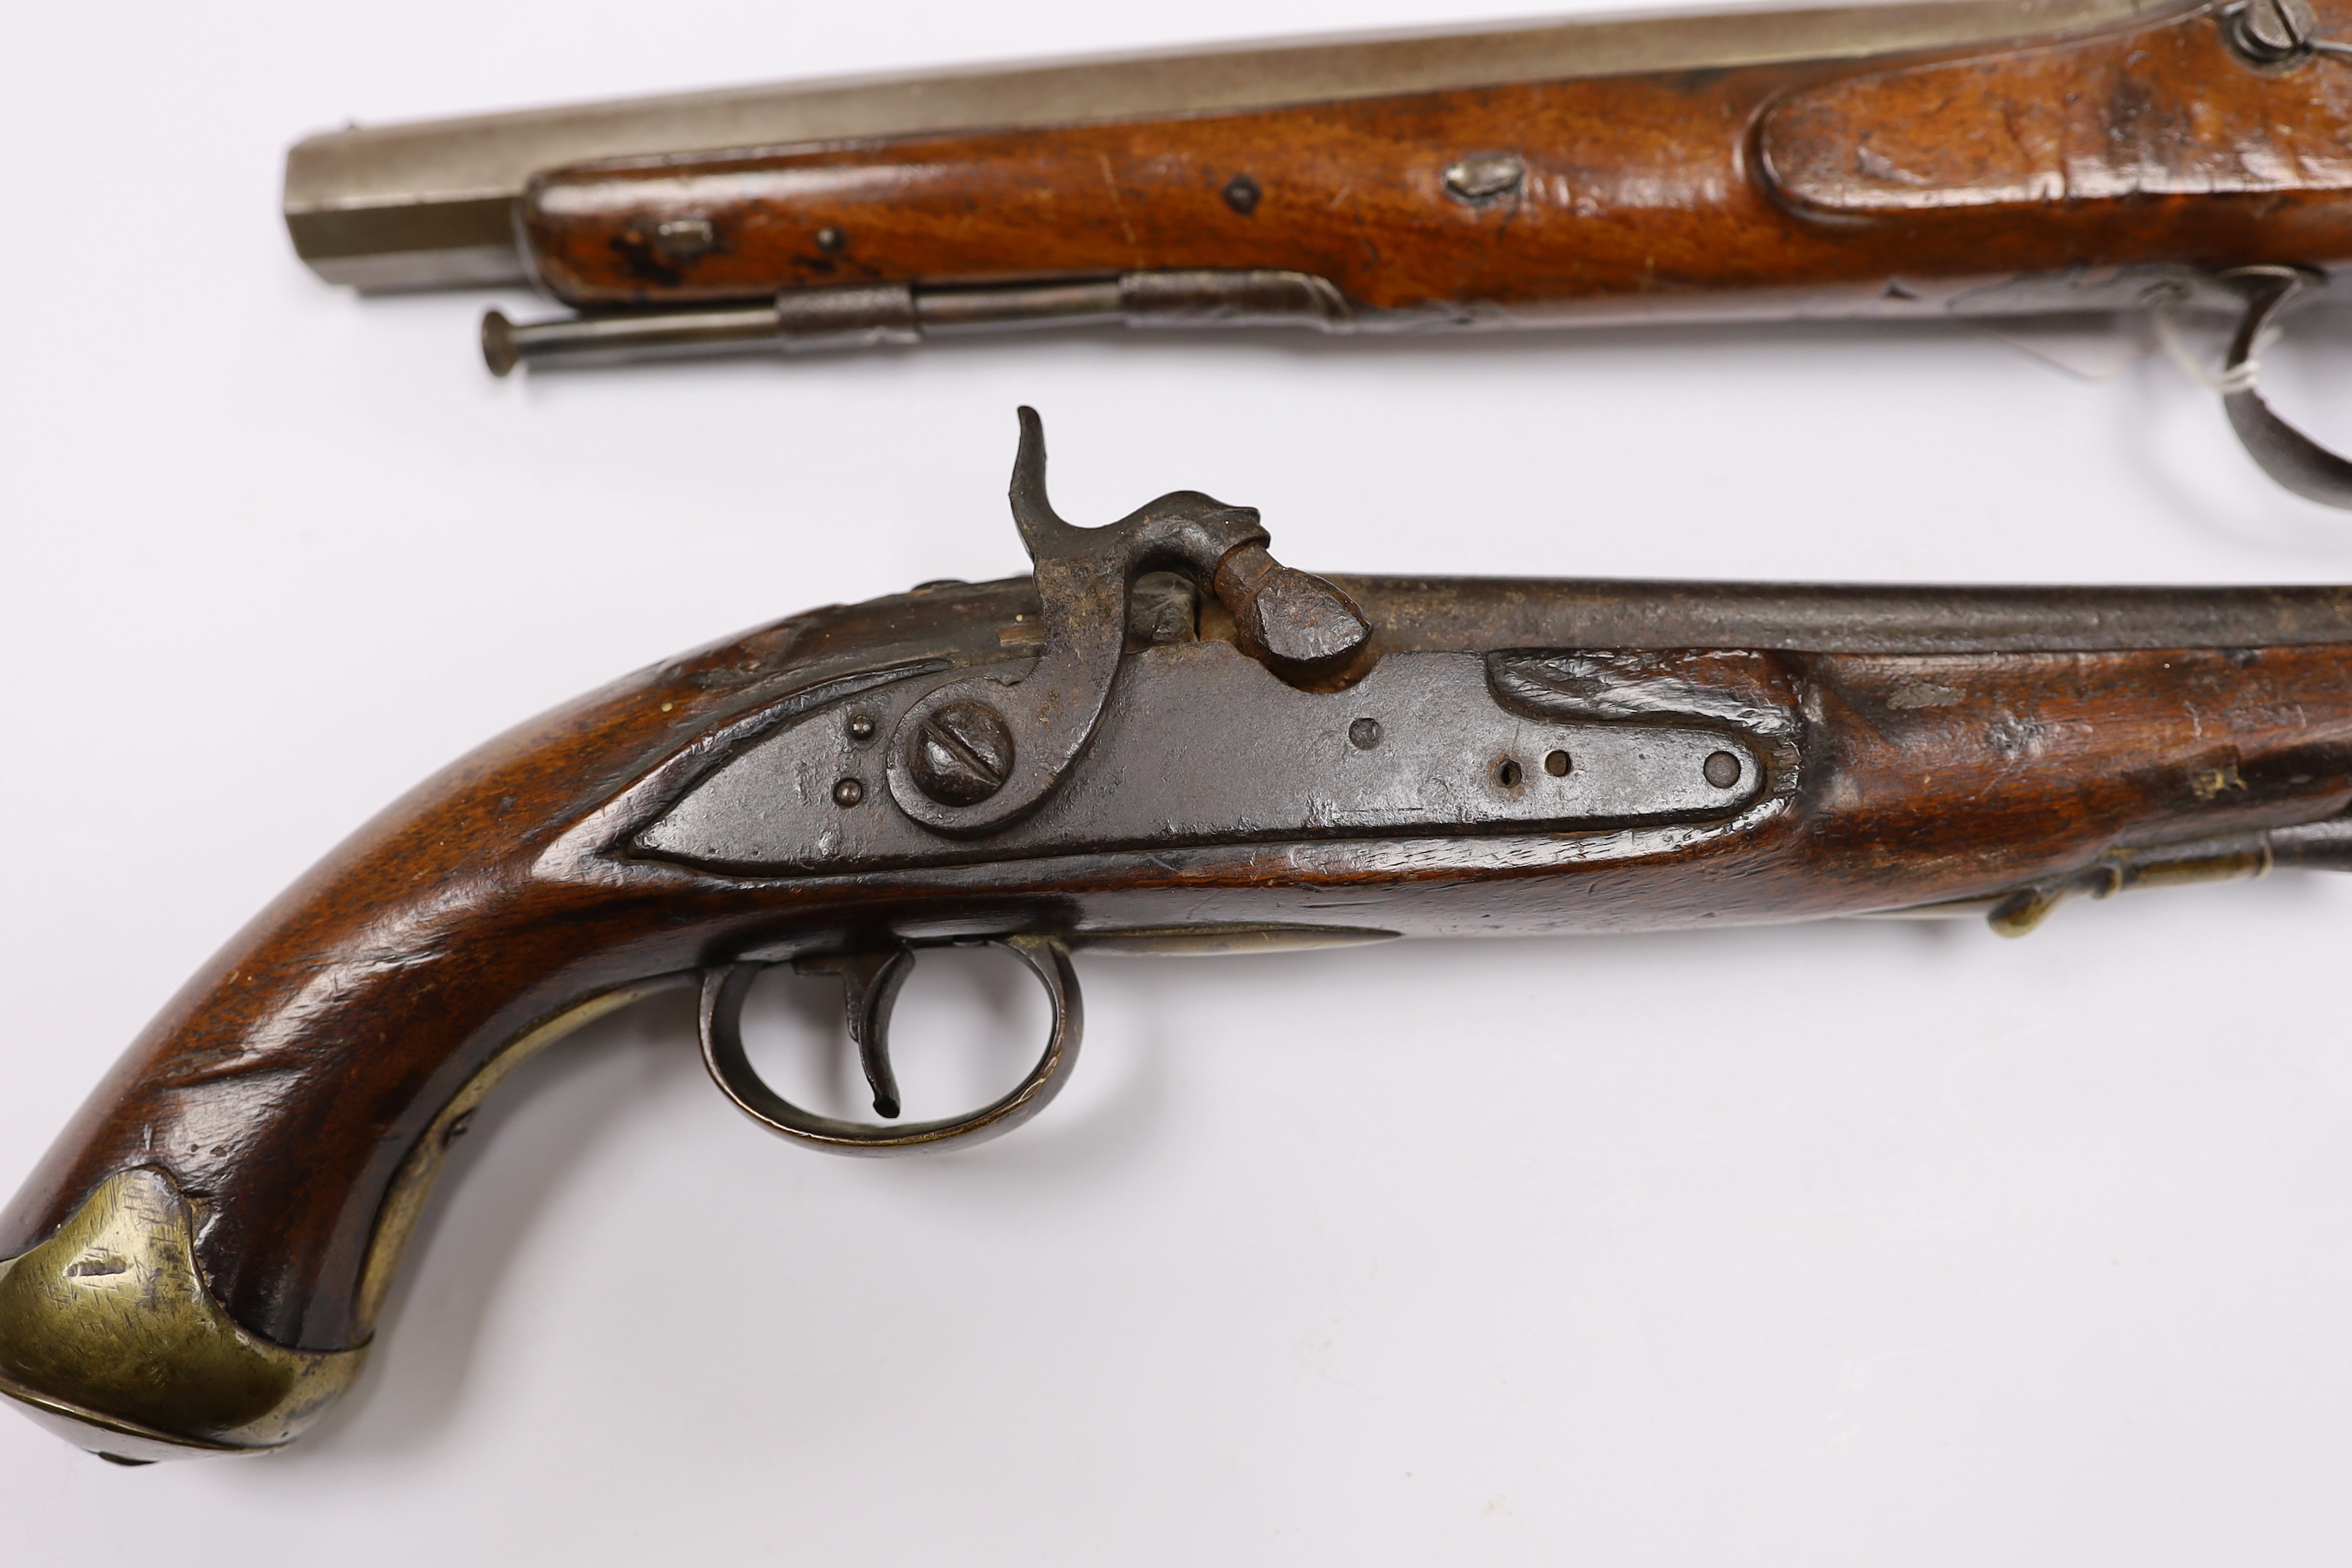 Two percussion 19th century pistols, both converted from flintlock, the larger example with engraved lock and hammer, octagonal barrel and chequered grip, together with a smaller overcoat pistol, fully stocked with brass